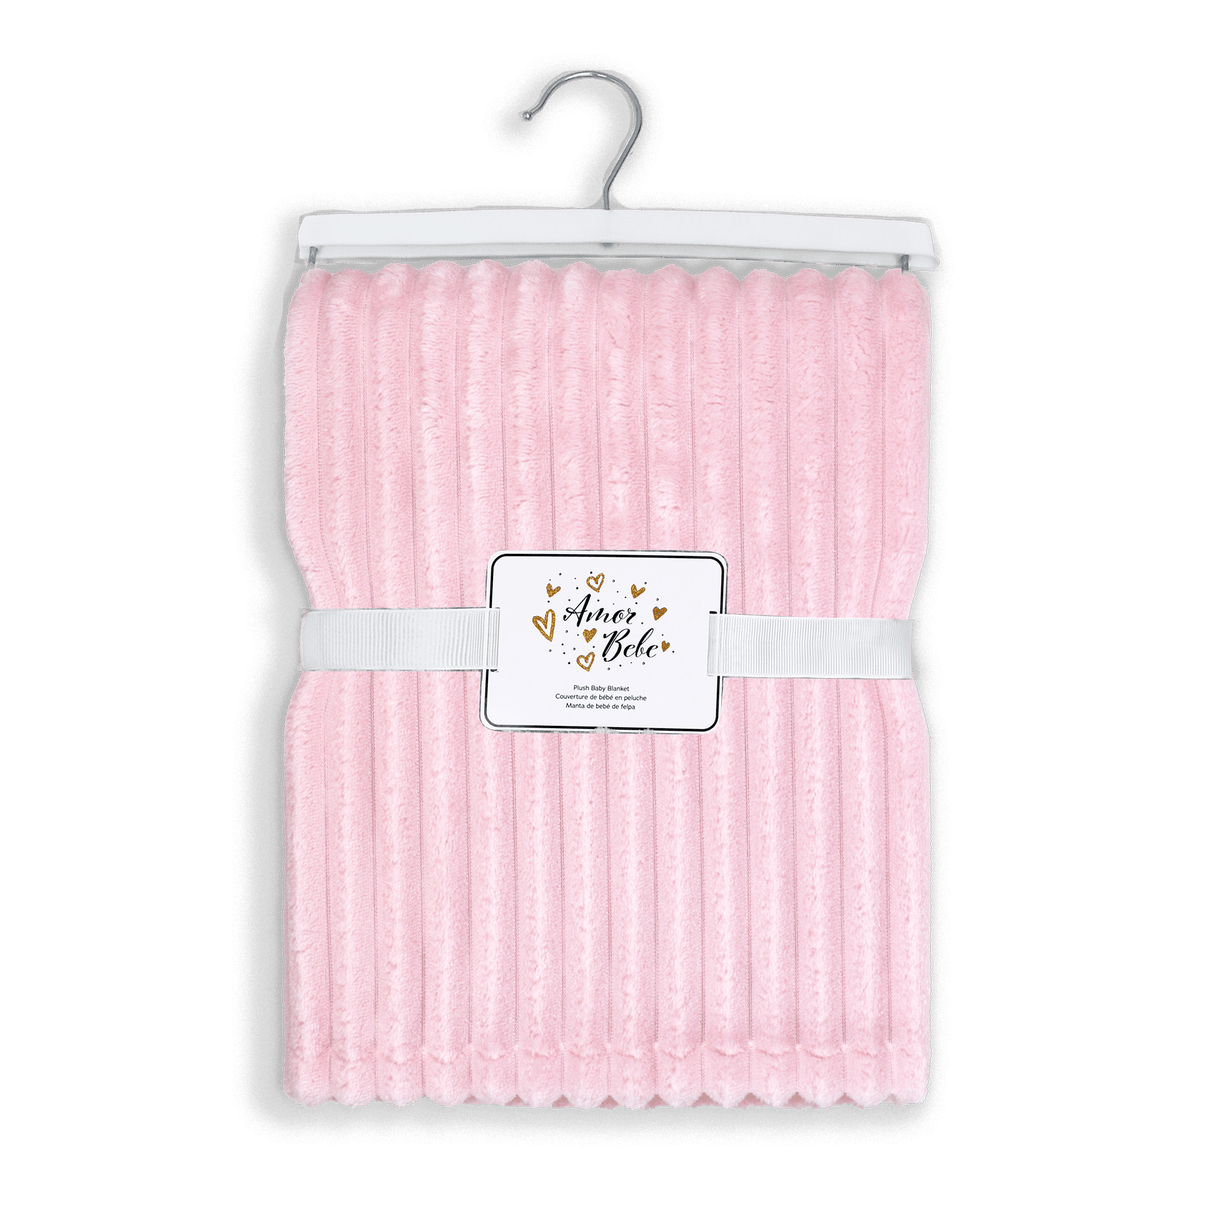 Amor Bebe Striped Plush Baby Blanket - A&M Clothing & Shoes